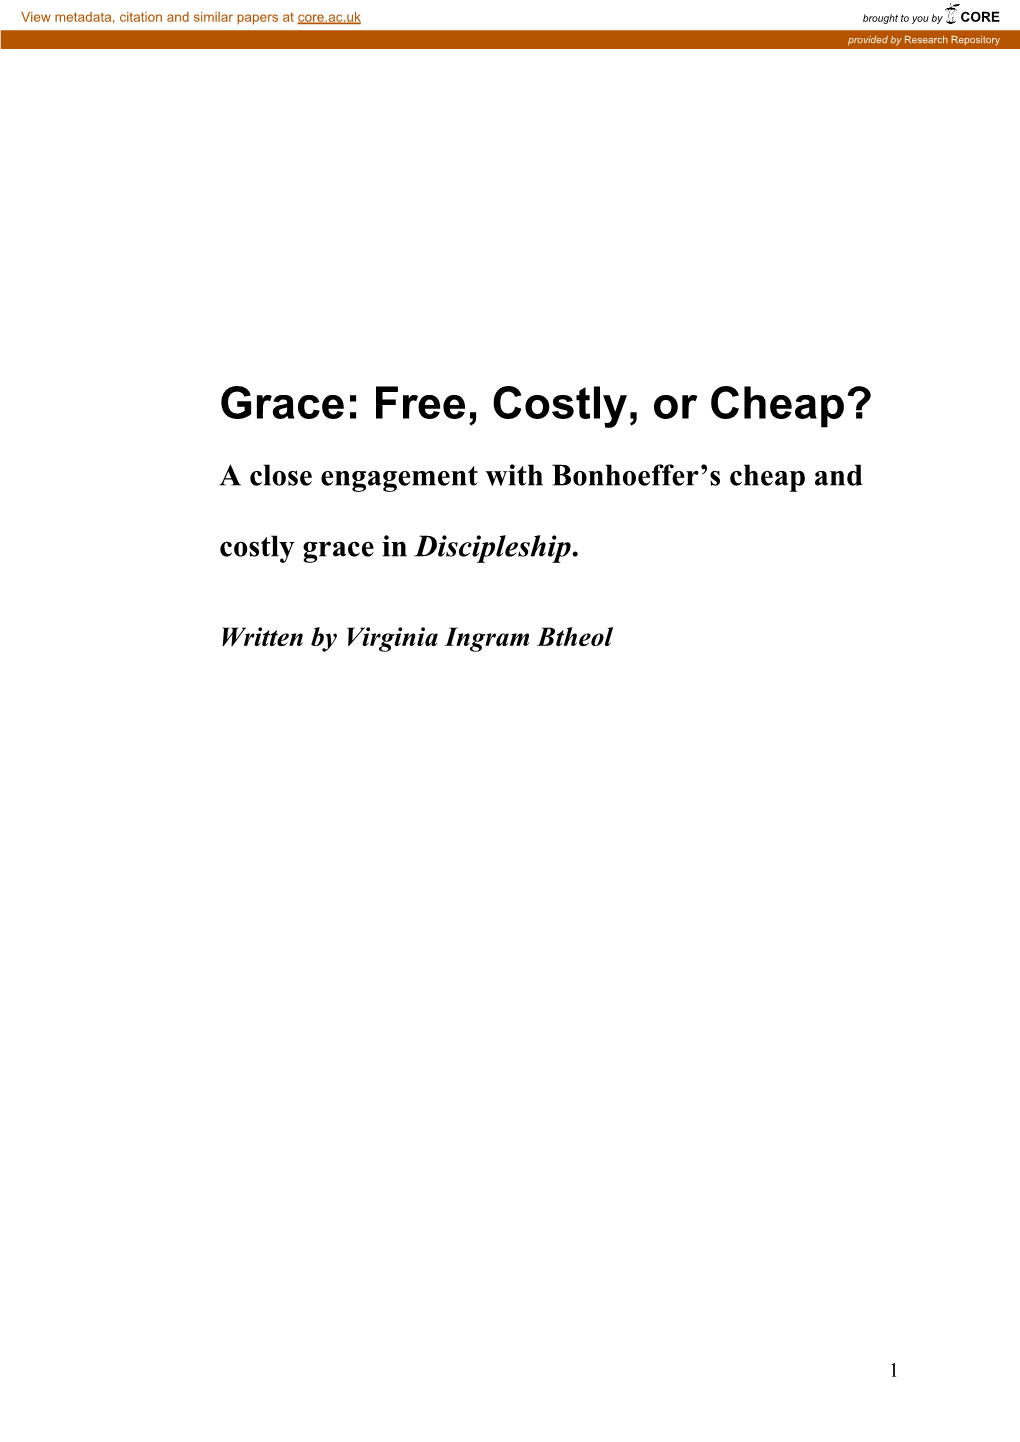 Grace: Free, Costly, Or Cheap?